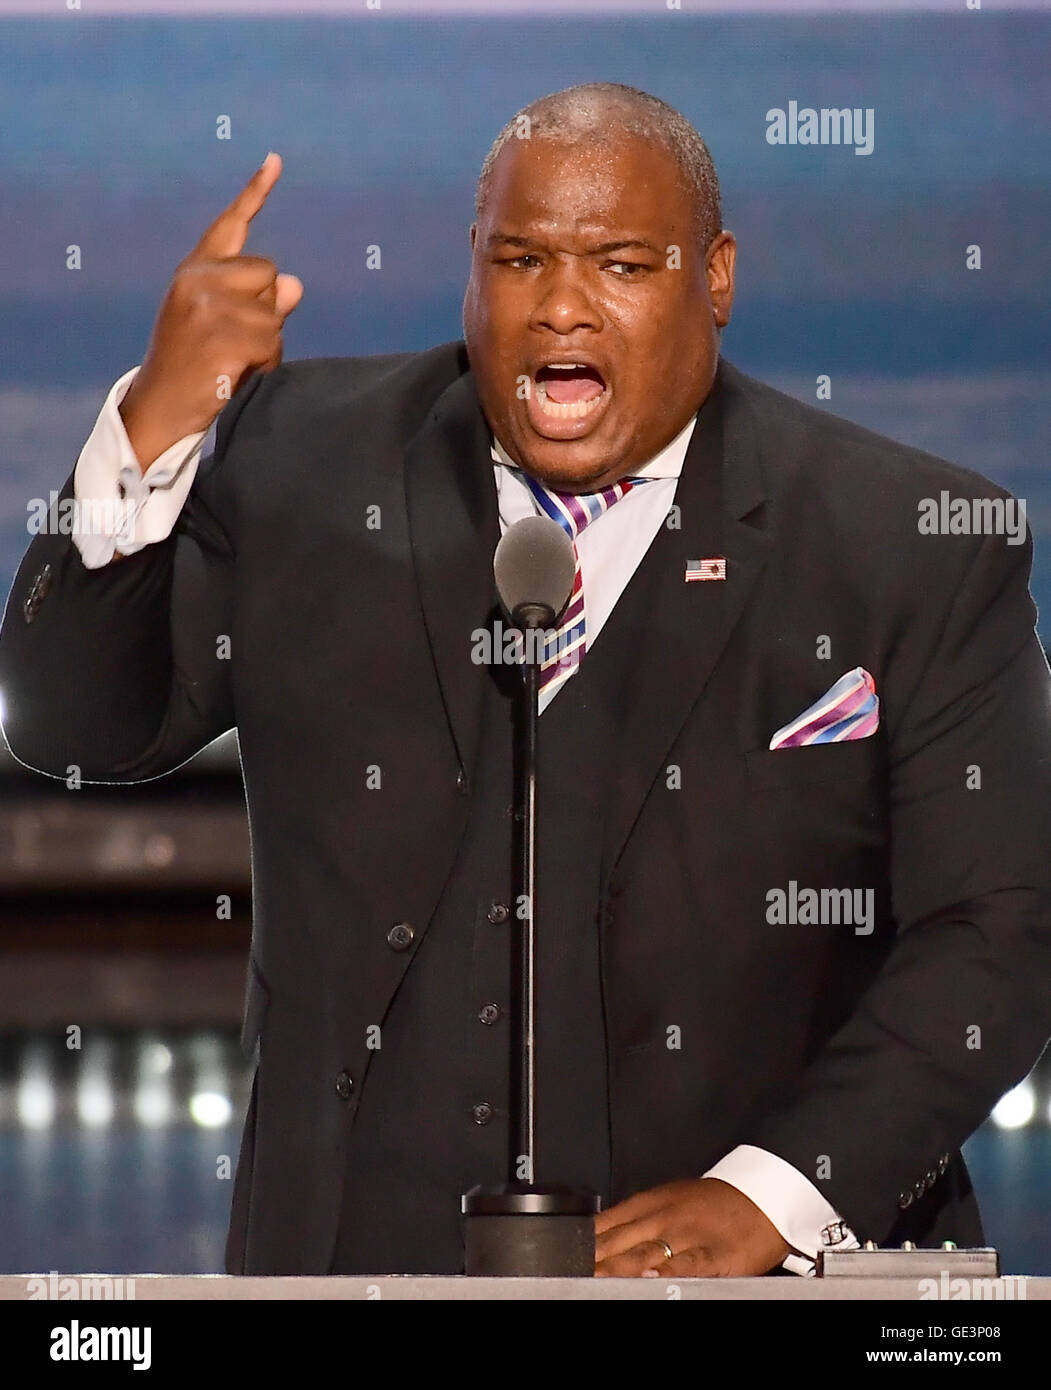 Pastor Mark Burns makes remarks at the 2016 Republican National Convention held at the Quicken Loans Arena in Cleveland, Ohio on Thursday, July 21, 2016. Credit: Ron Sachs/CNP (RESTRICTION: NO New York or New Jersey Newspapers or newspapers within a 75 mile radius of New York City) Stock Photo